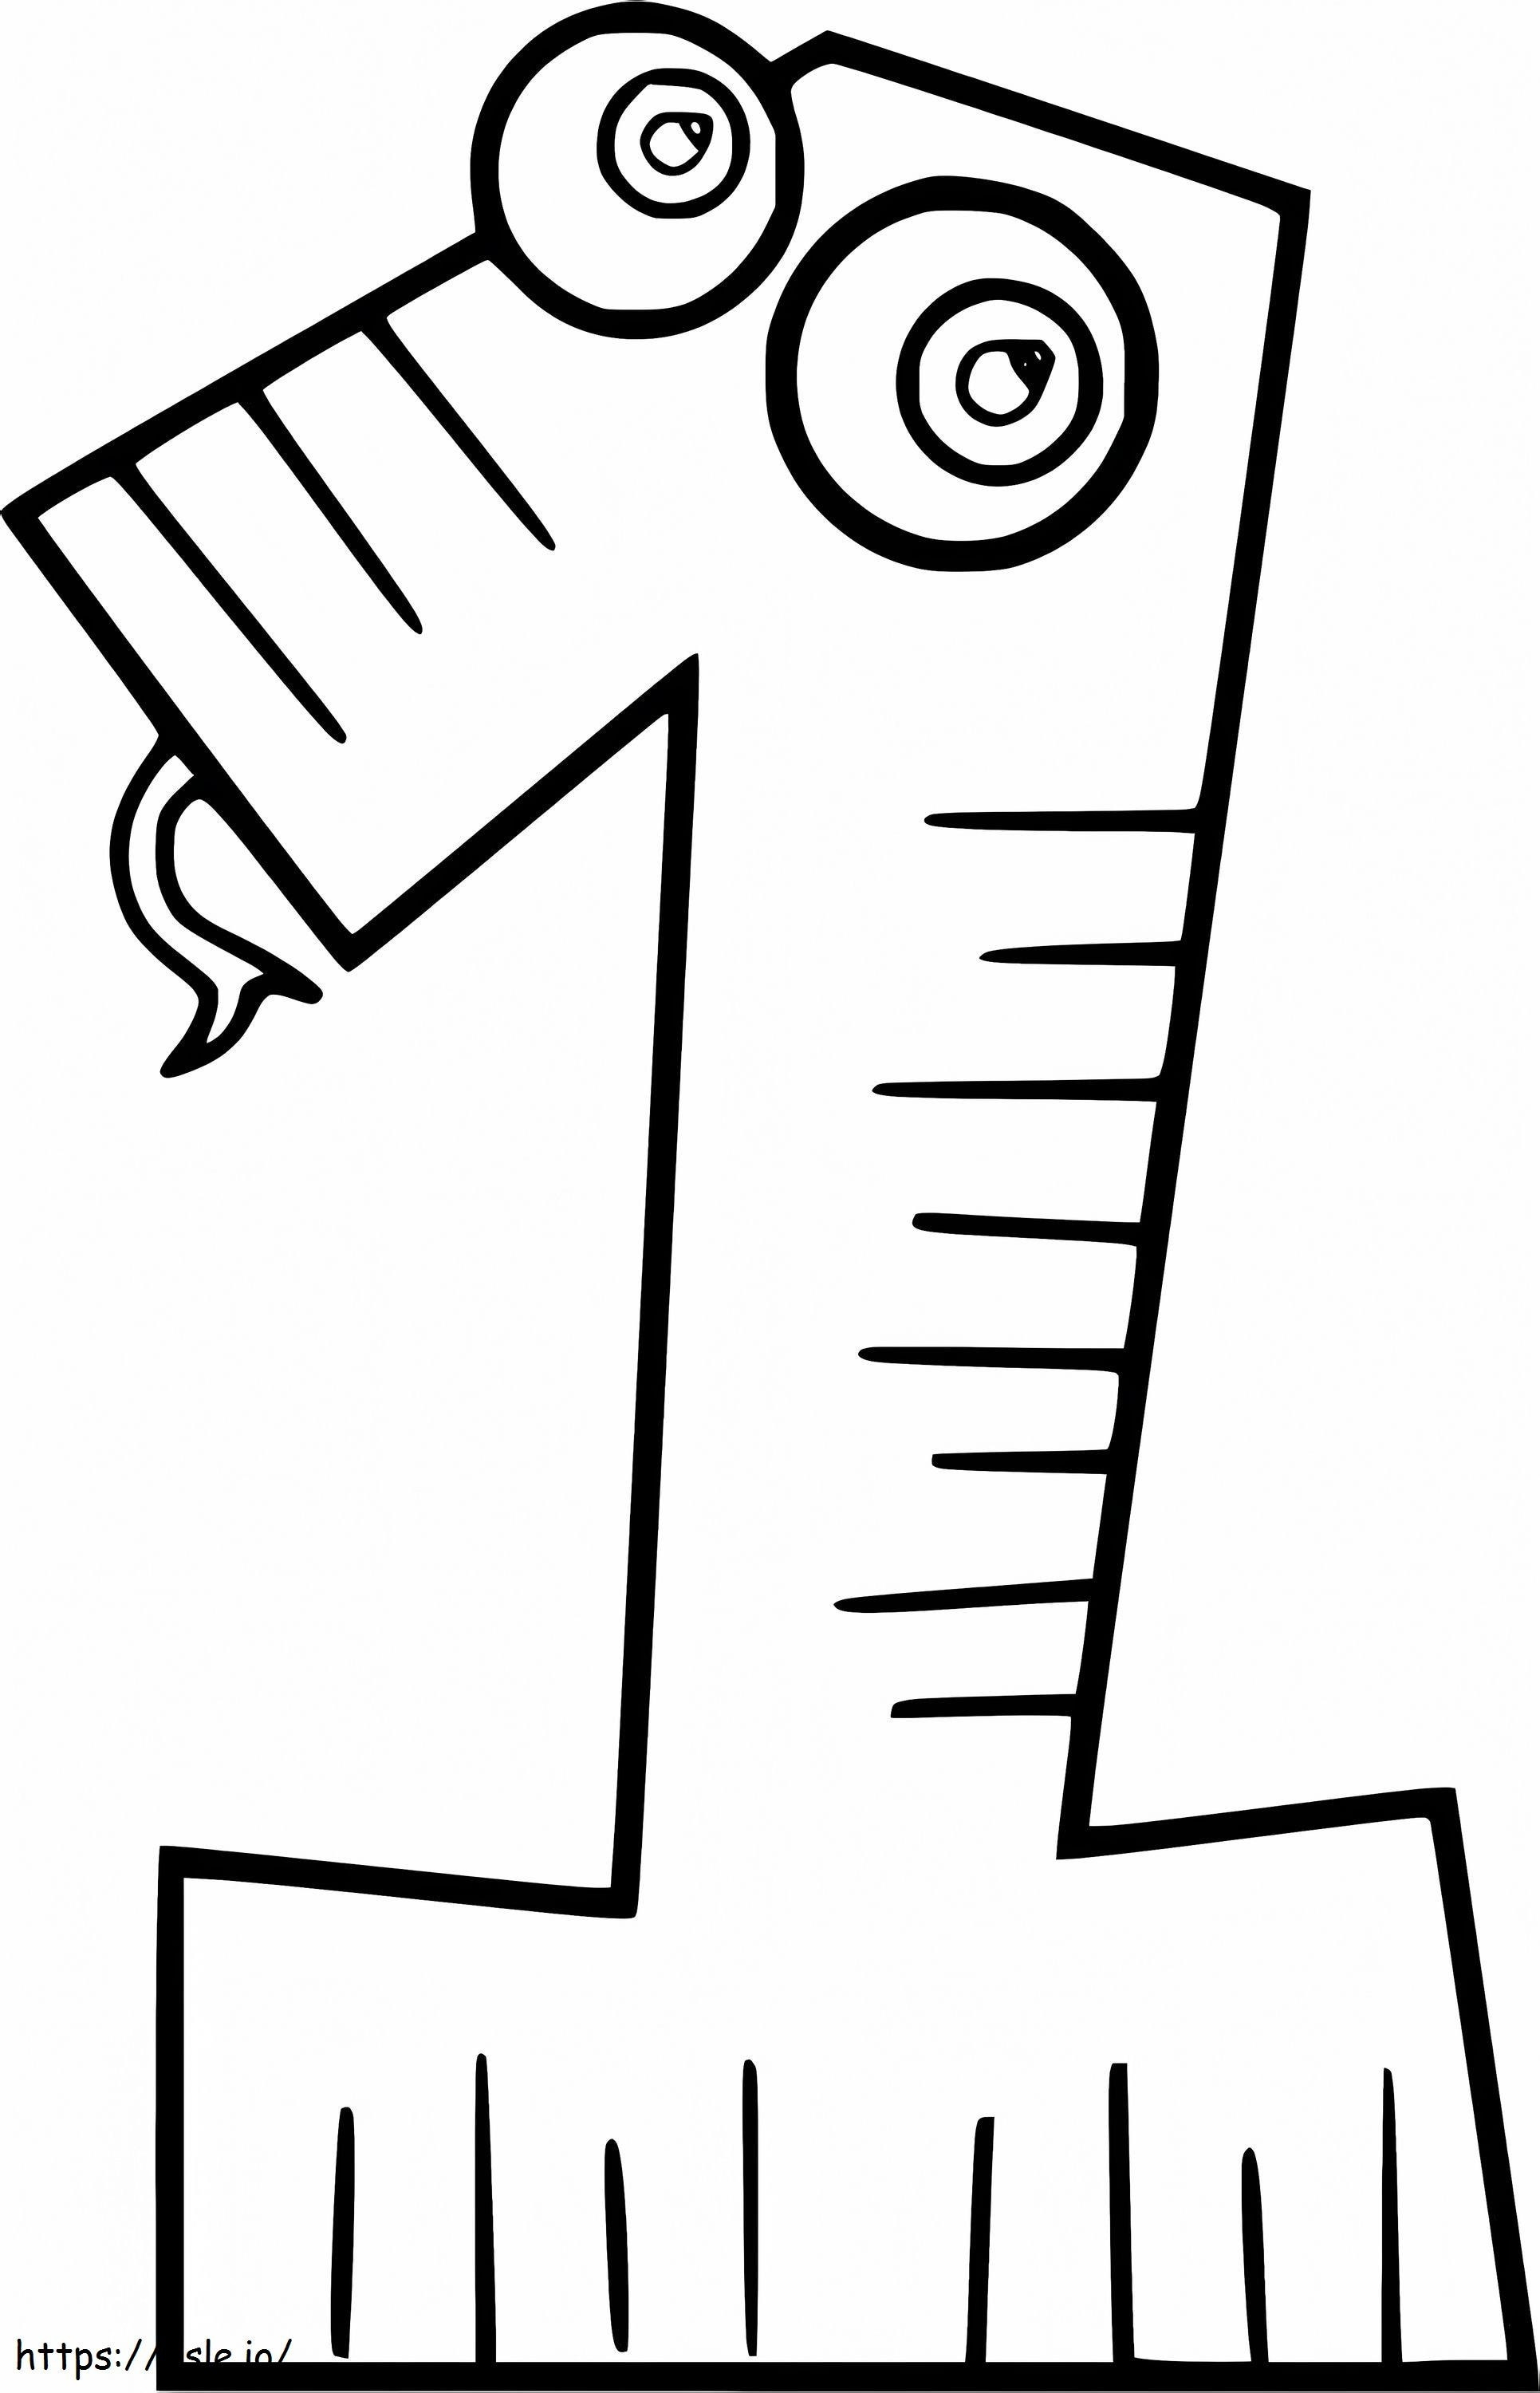 Snake Number 1 coloring page